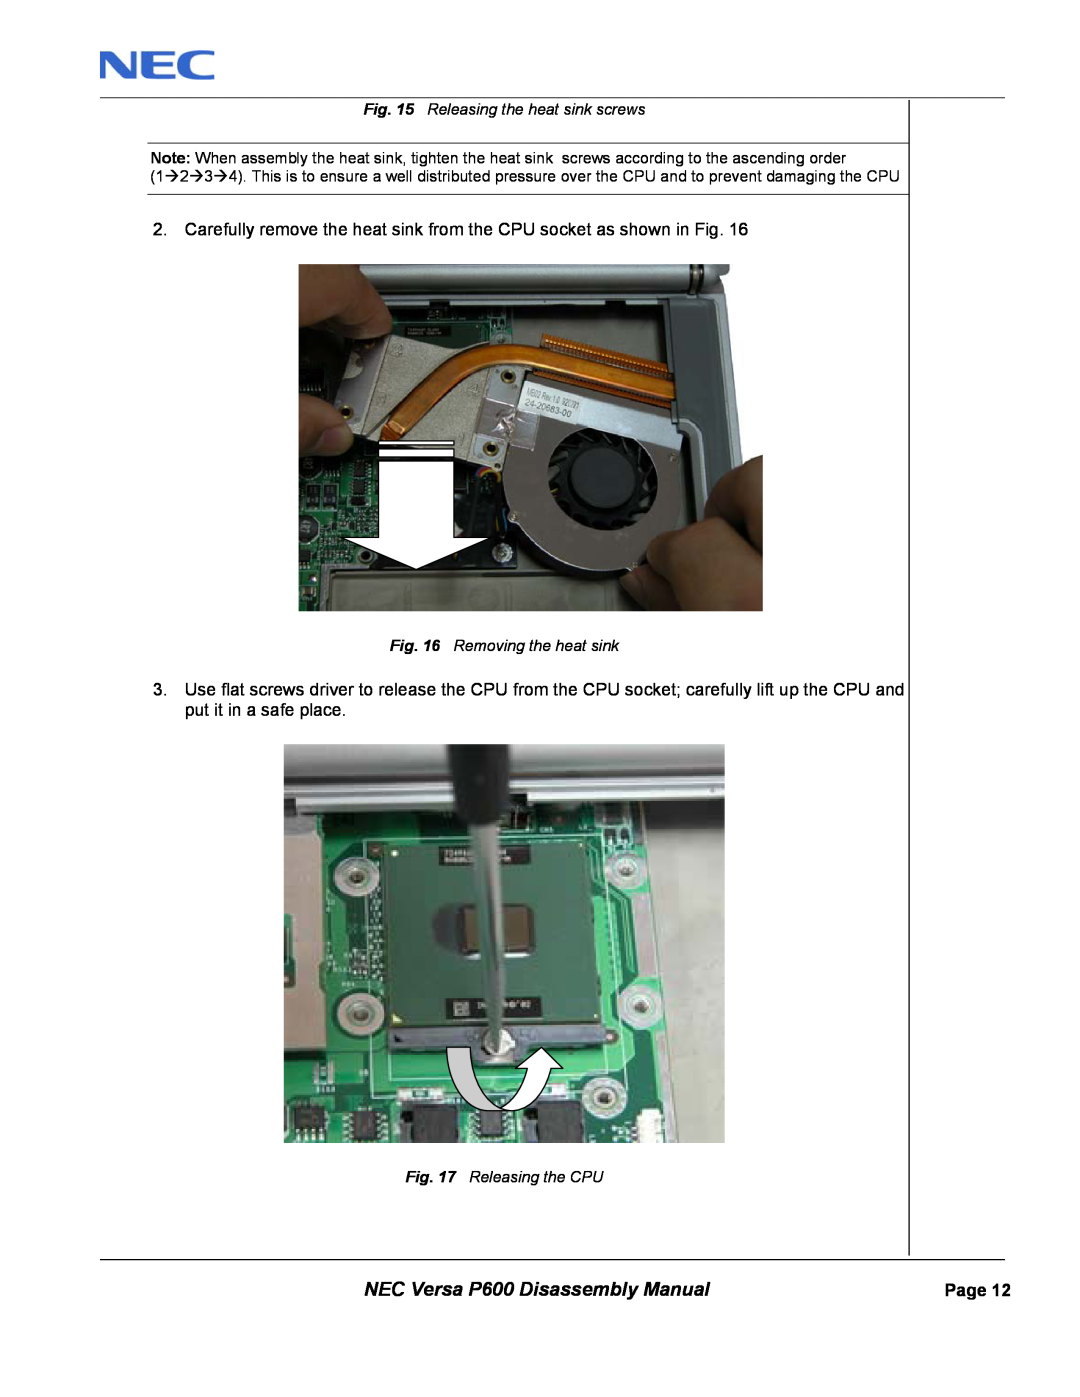 NEC manual NEC Versa P600 Disassembly Manual, Releasing the heat sink screws, Removing the heat sink, Releasing the CPU 